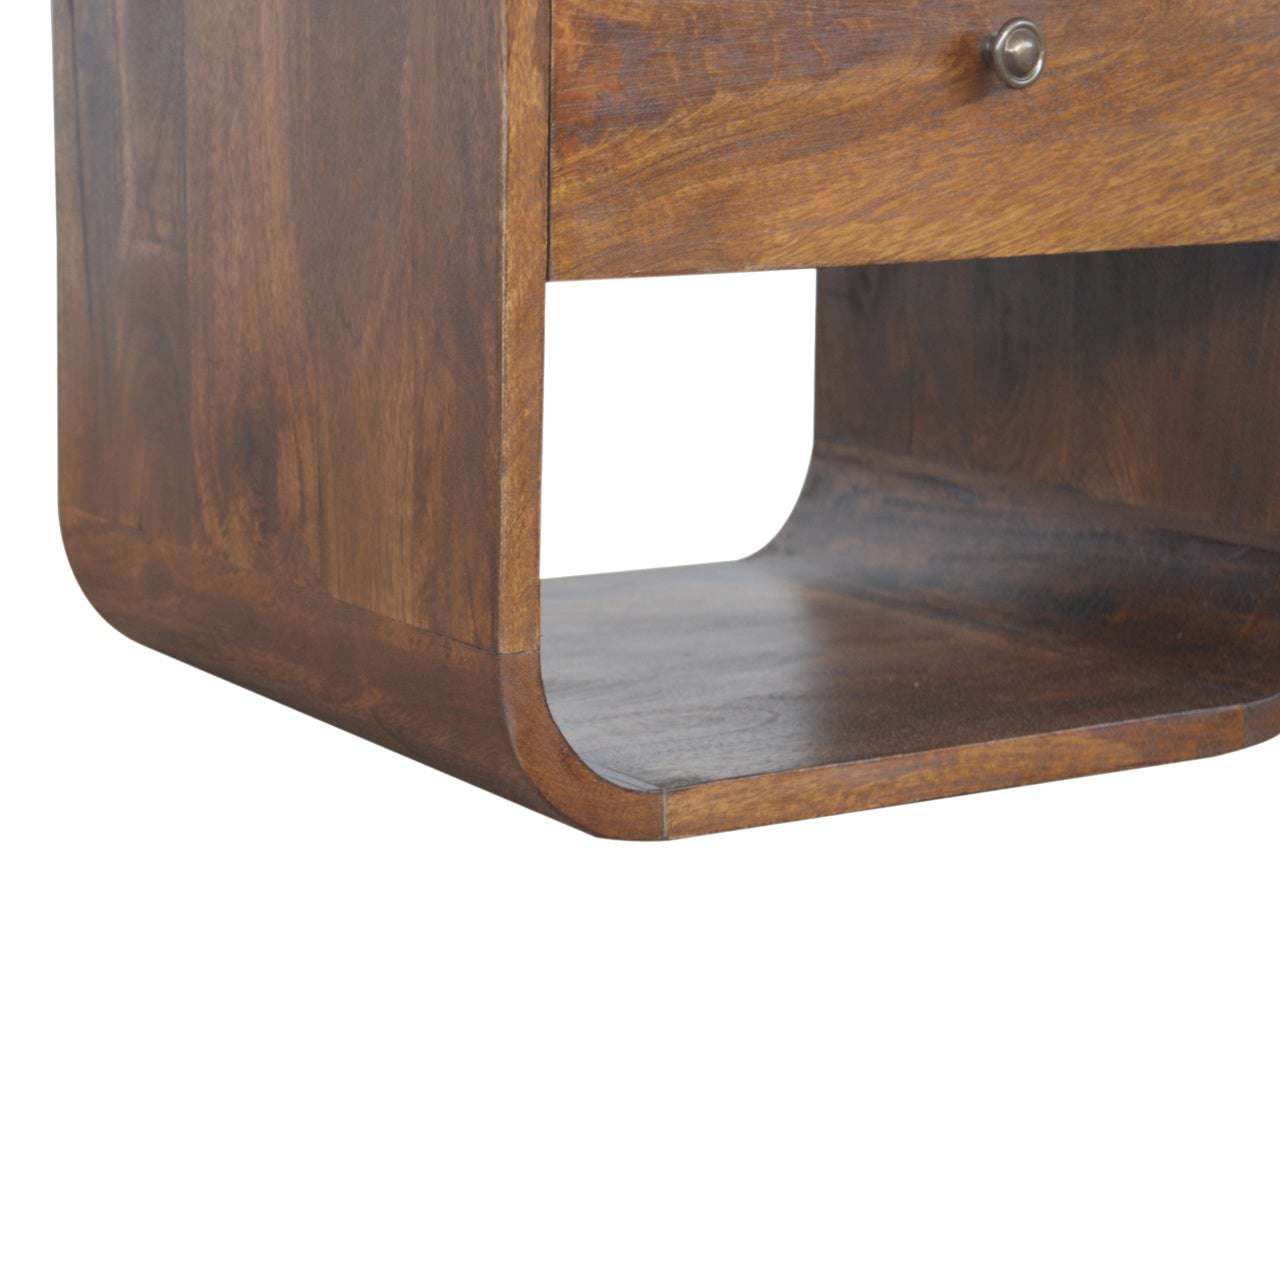 Solid Wood Chesnut Curved Edge Bedside with Drawer